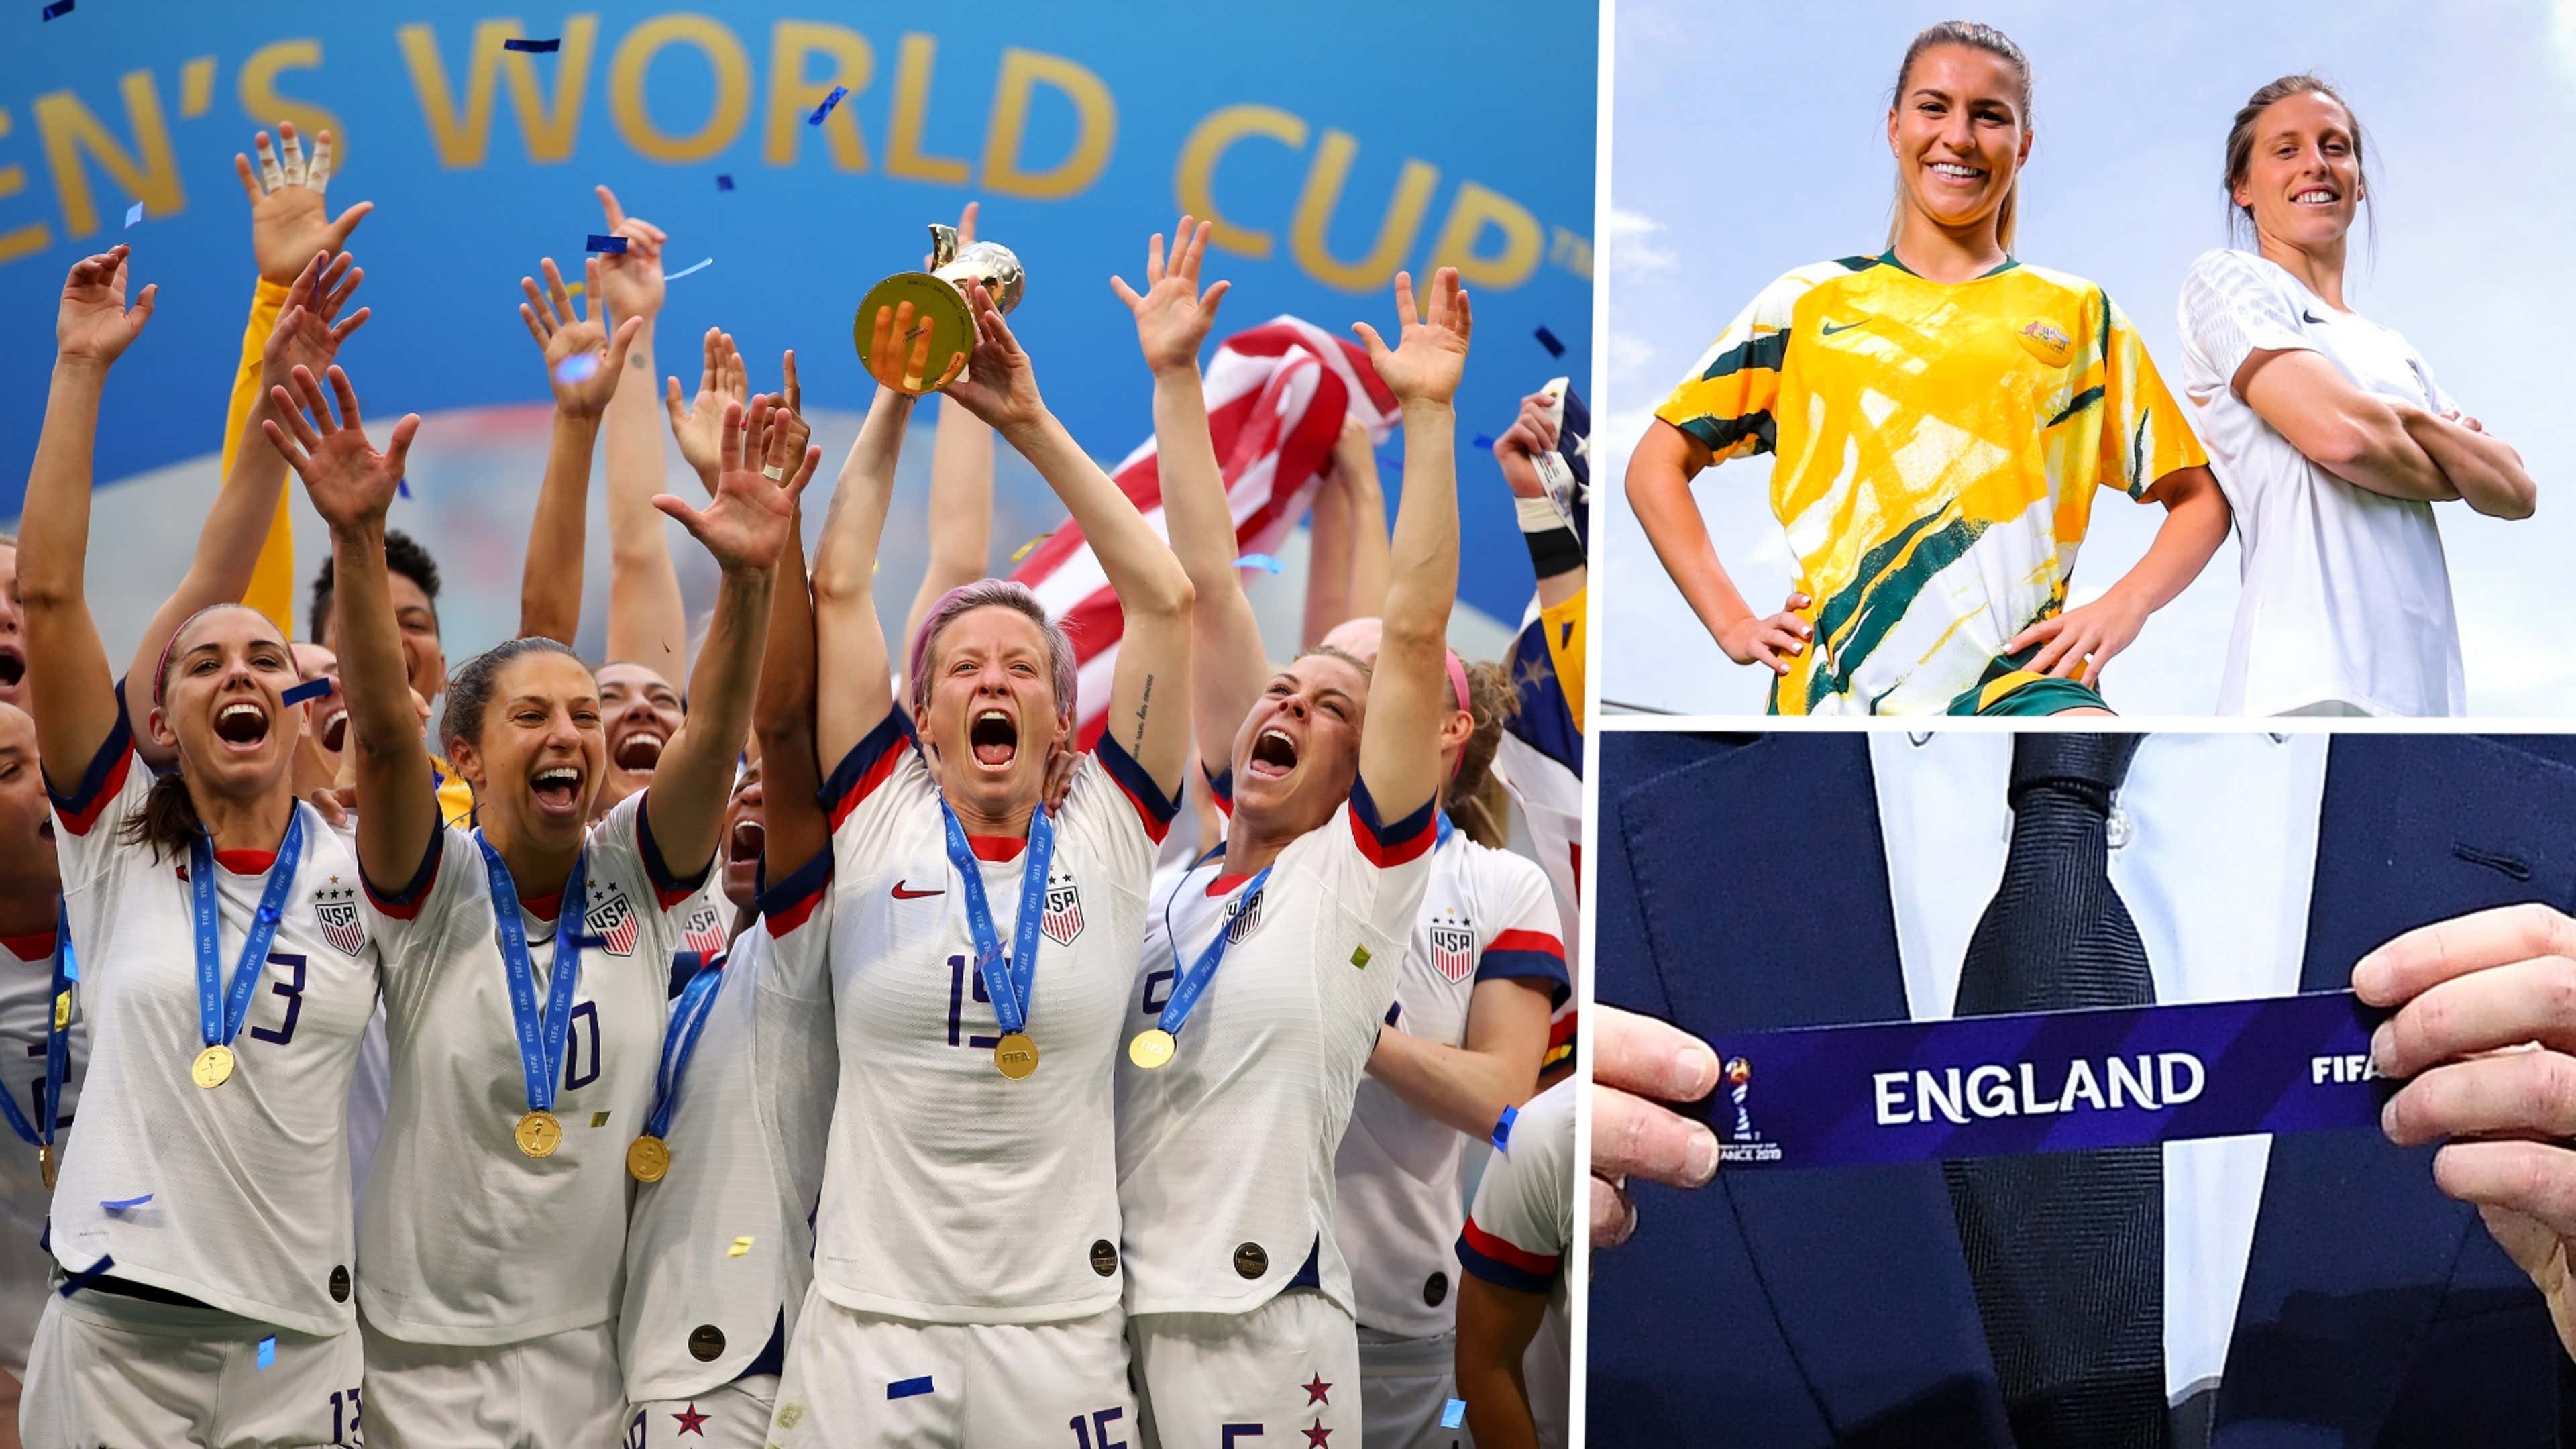 Women's World Cup 2023: Fixtures and match schedule for Round of 16, Women's World Cup News